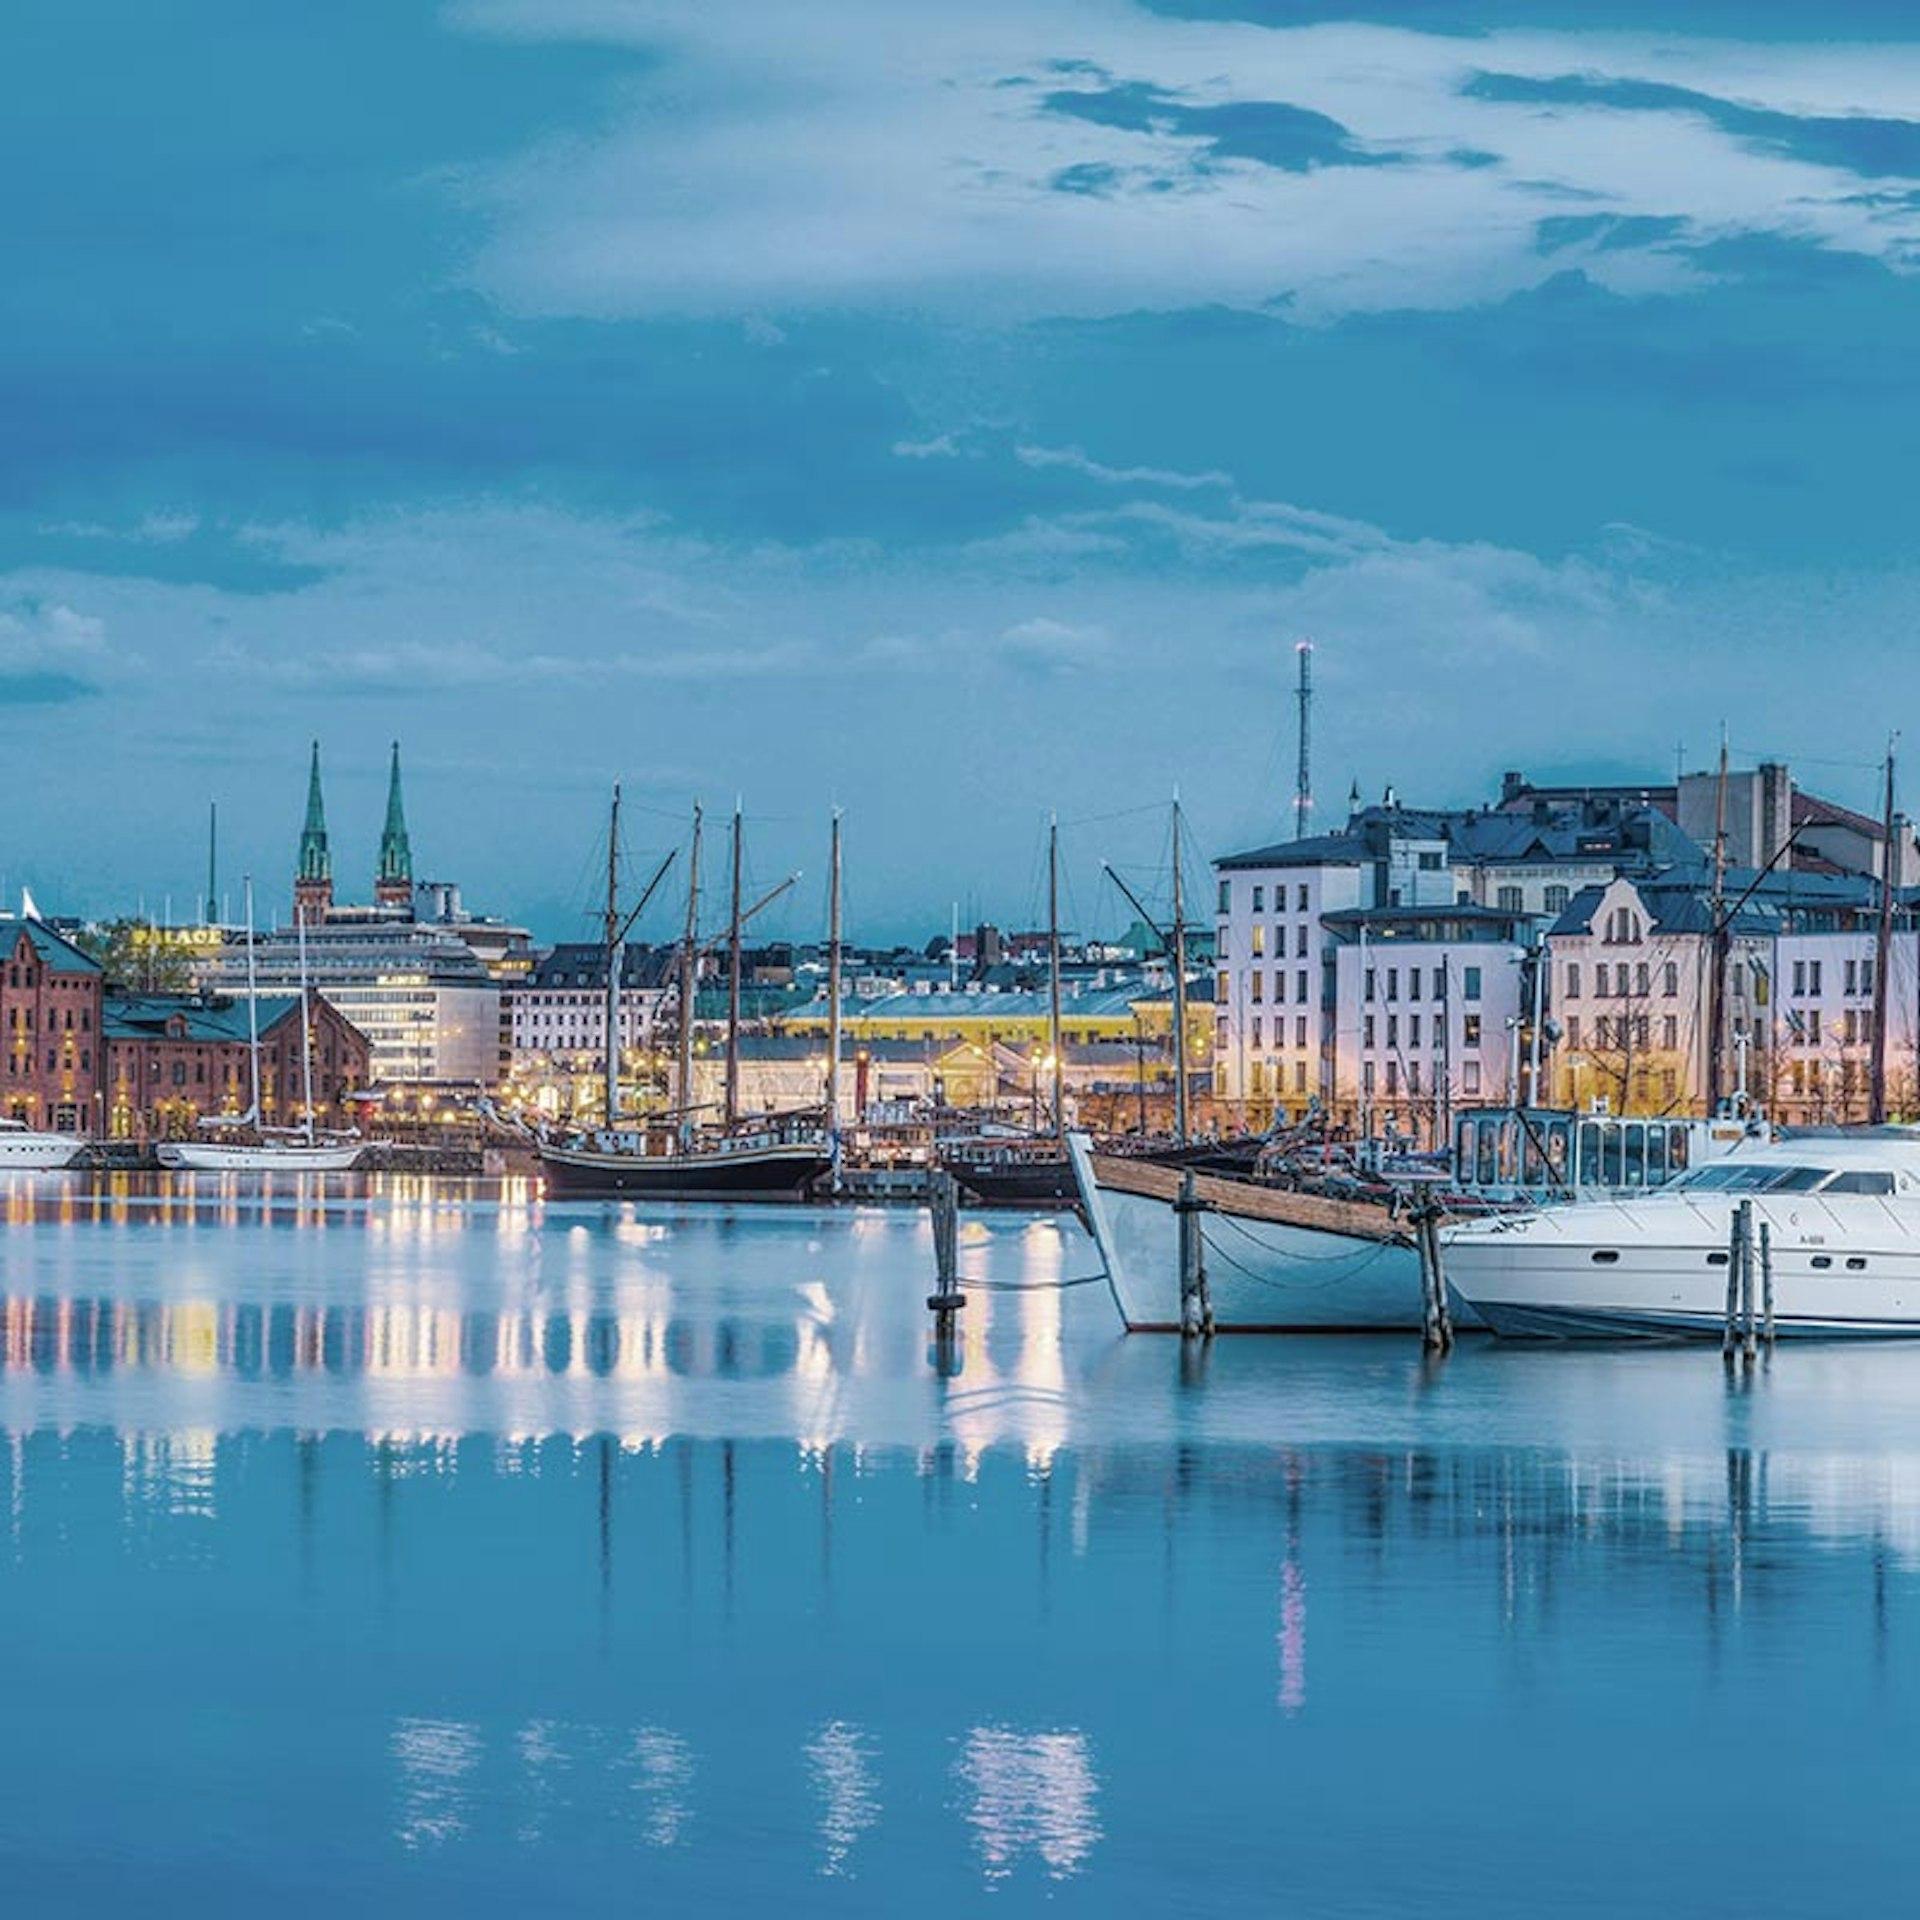 Get the latest news and updates on e-invoicing, e-ordering, e-archiving and indirect tax regulatory requirements for Finland.